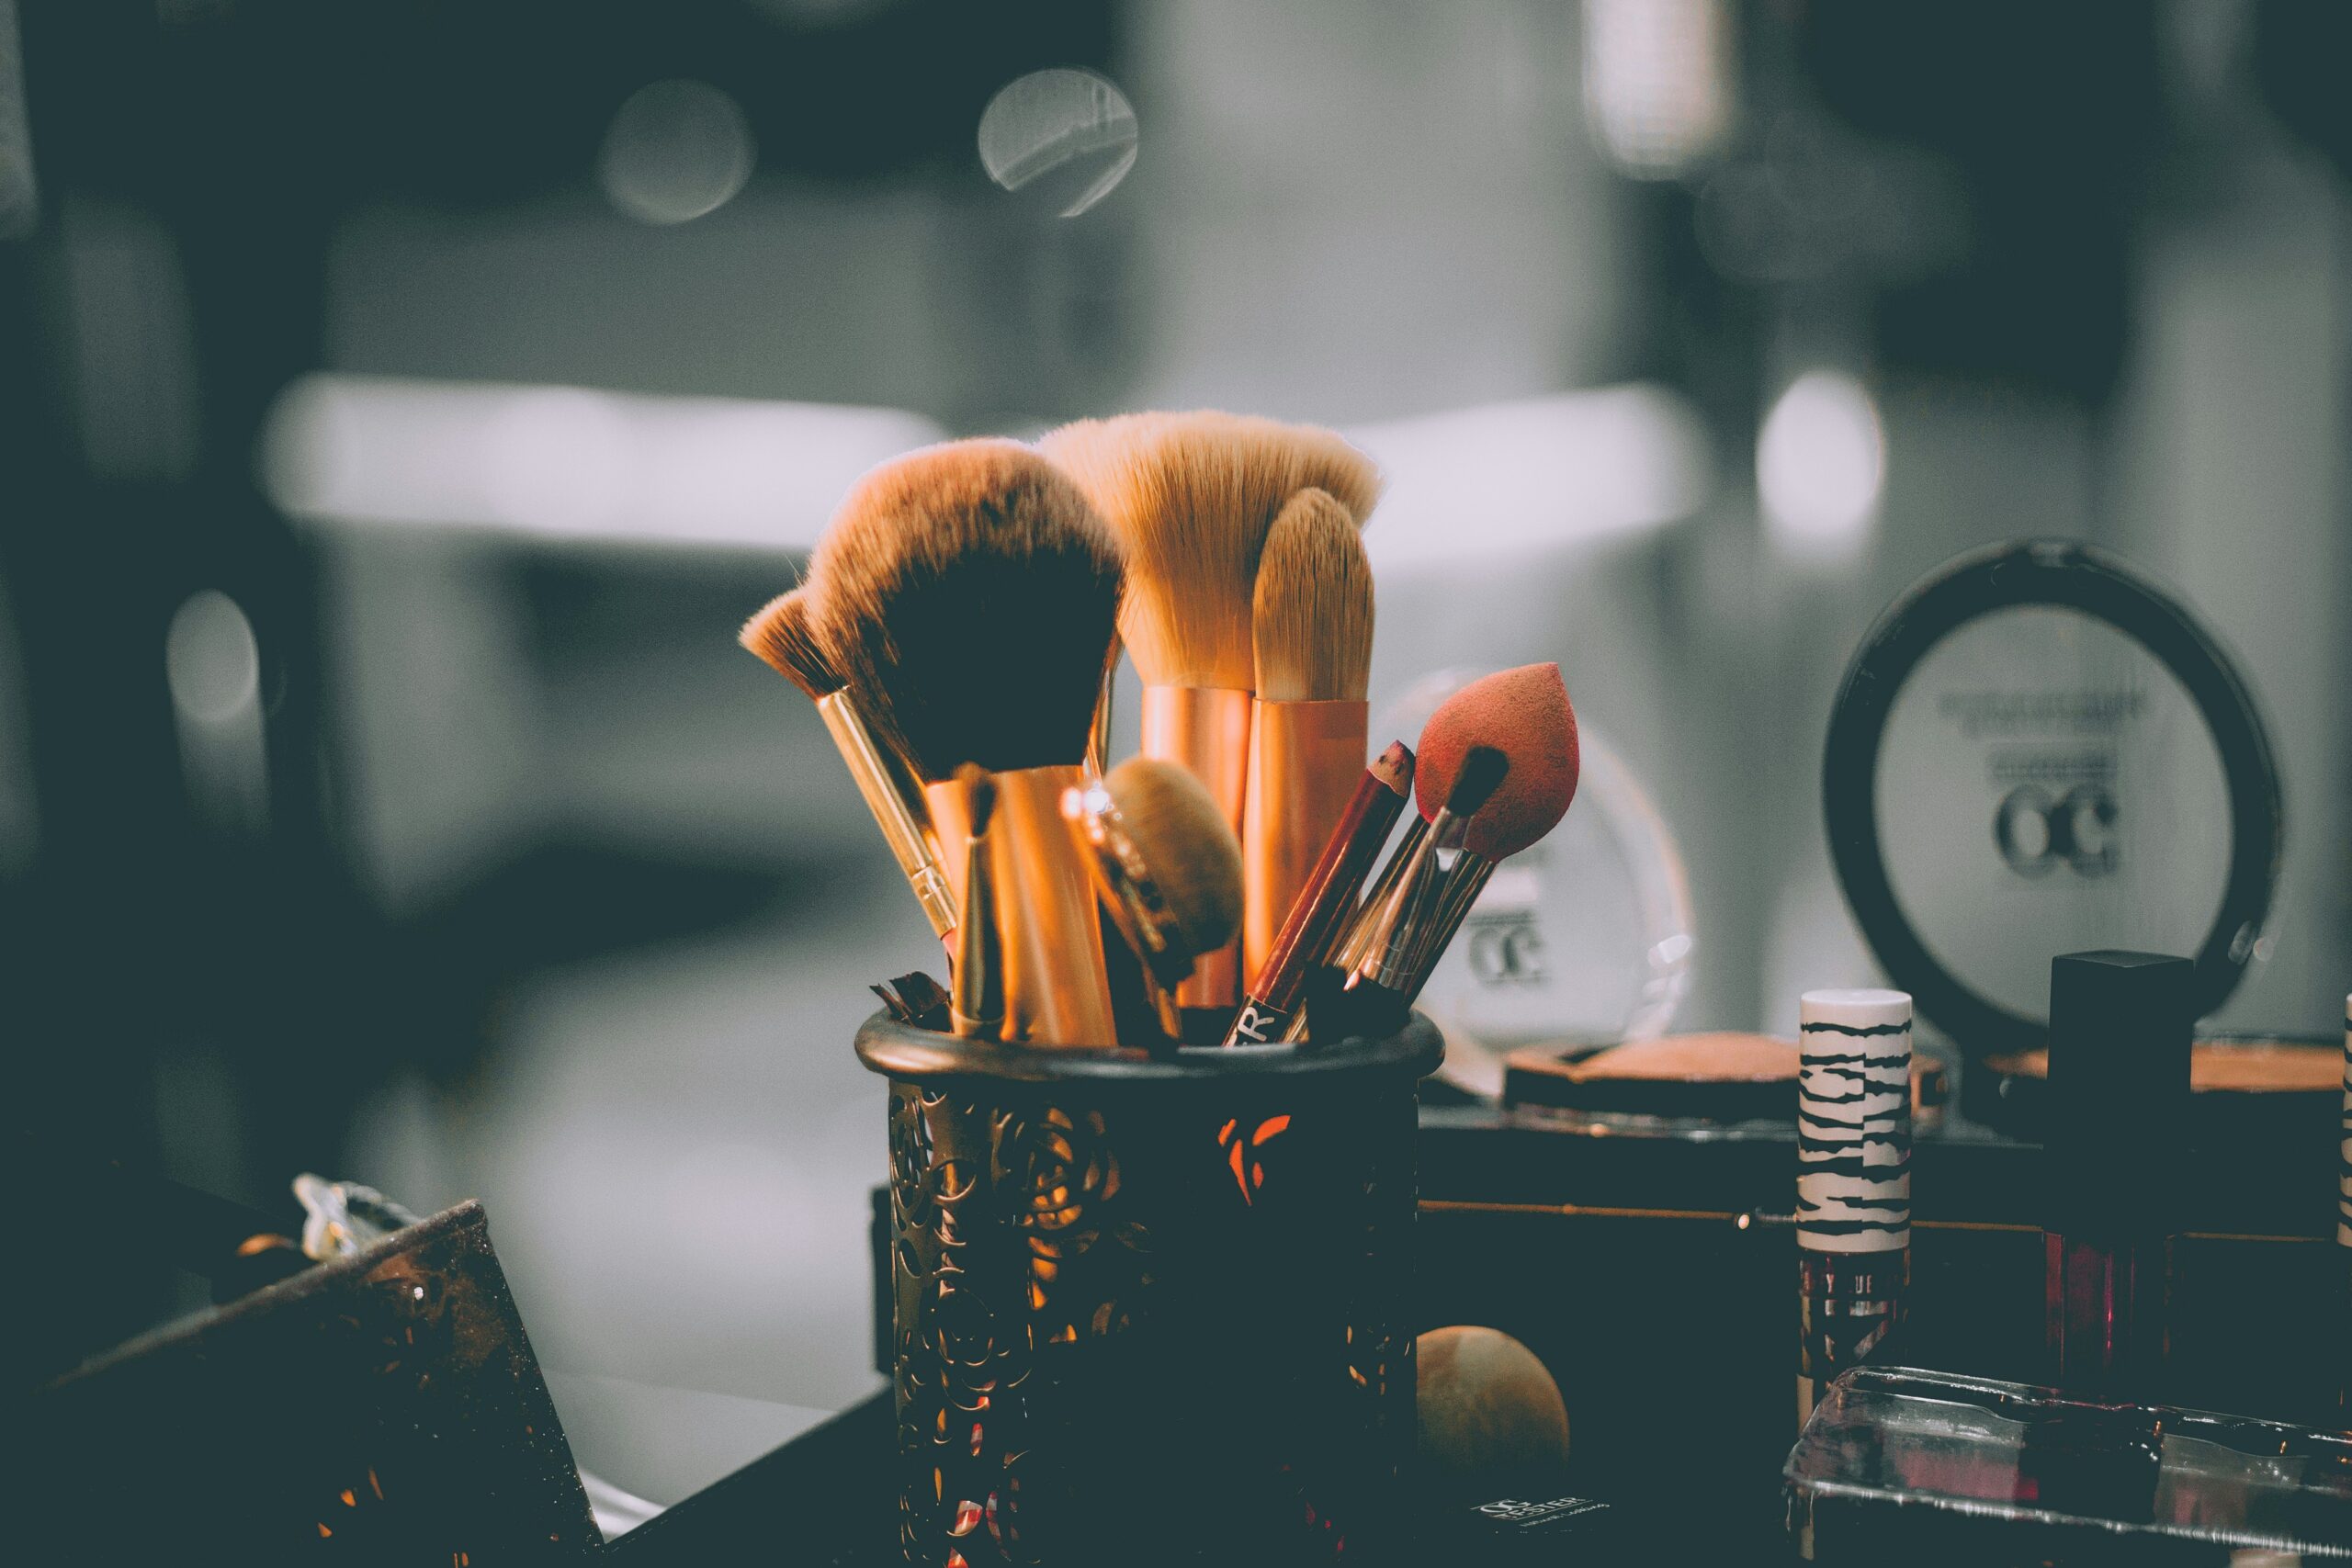 In the sub-Saharan African region, cosmetics present remarkable opportunities.